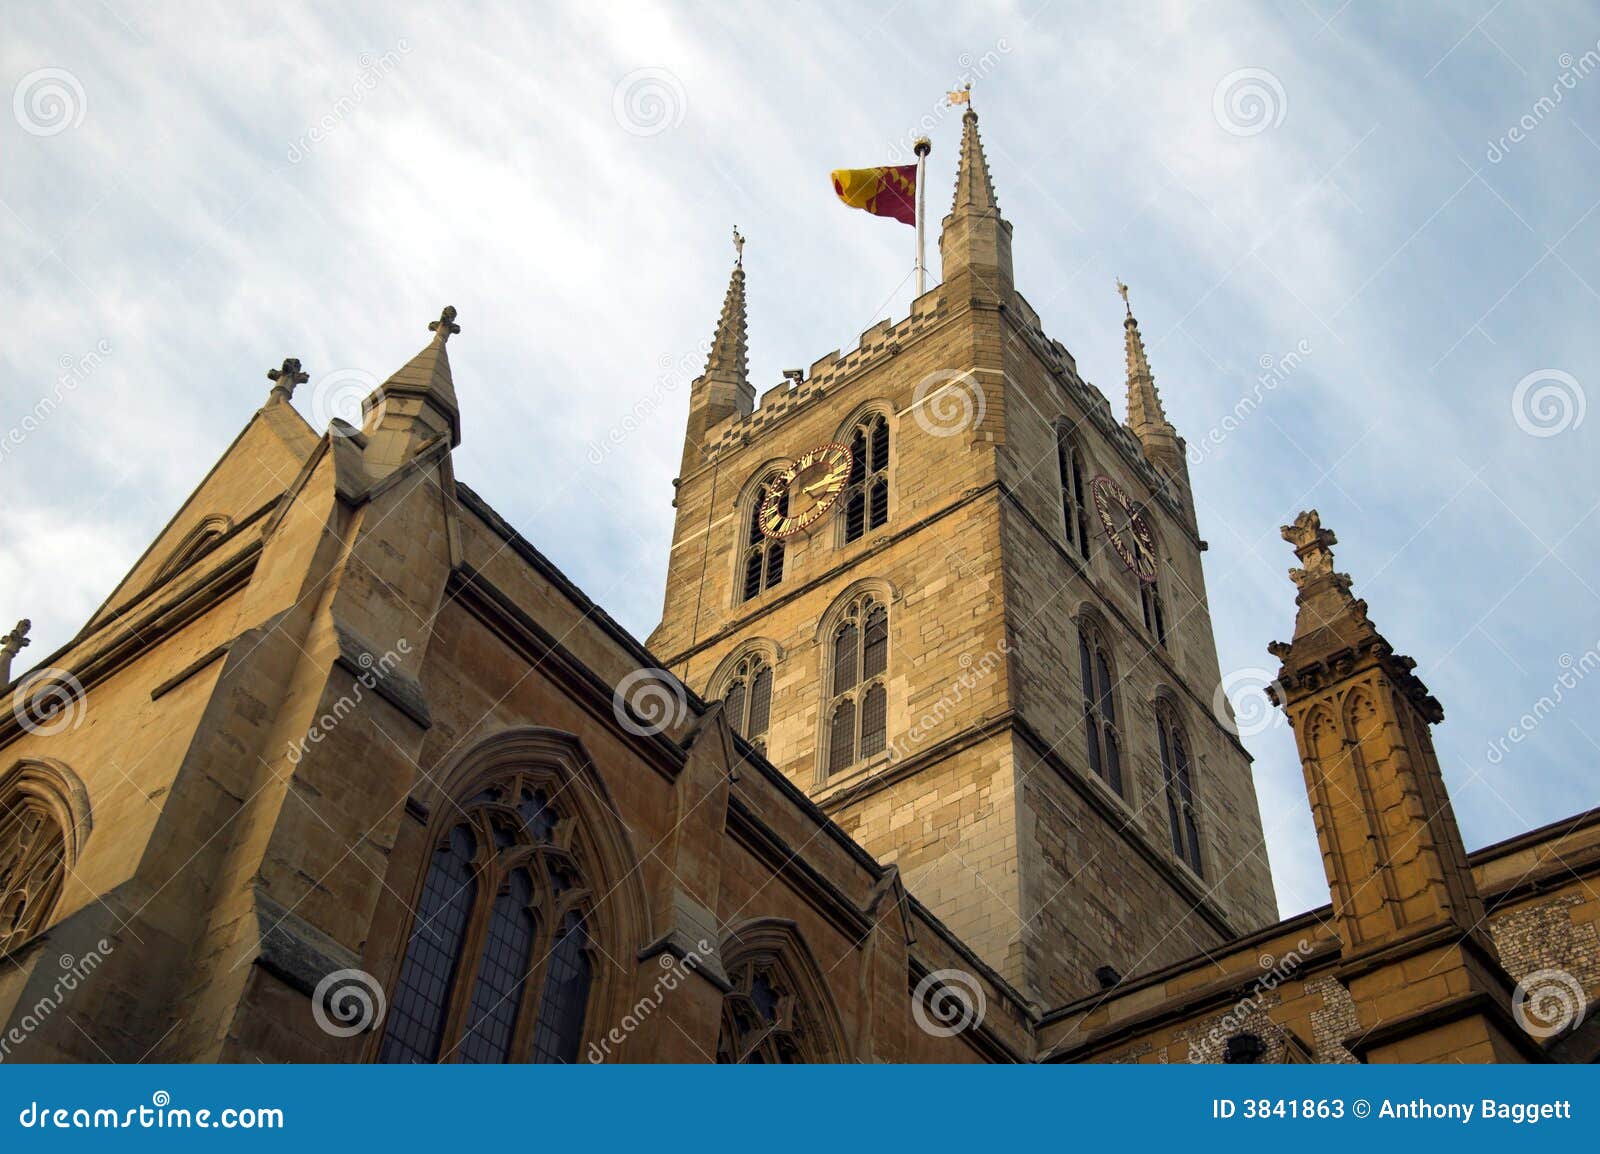 southwark cathedral